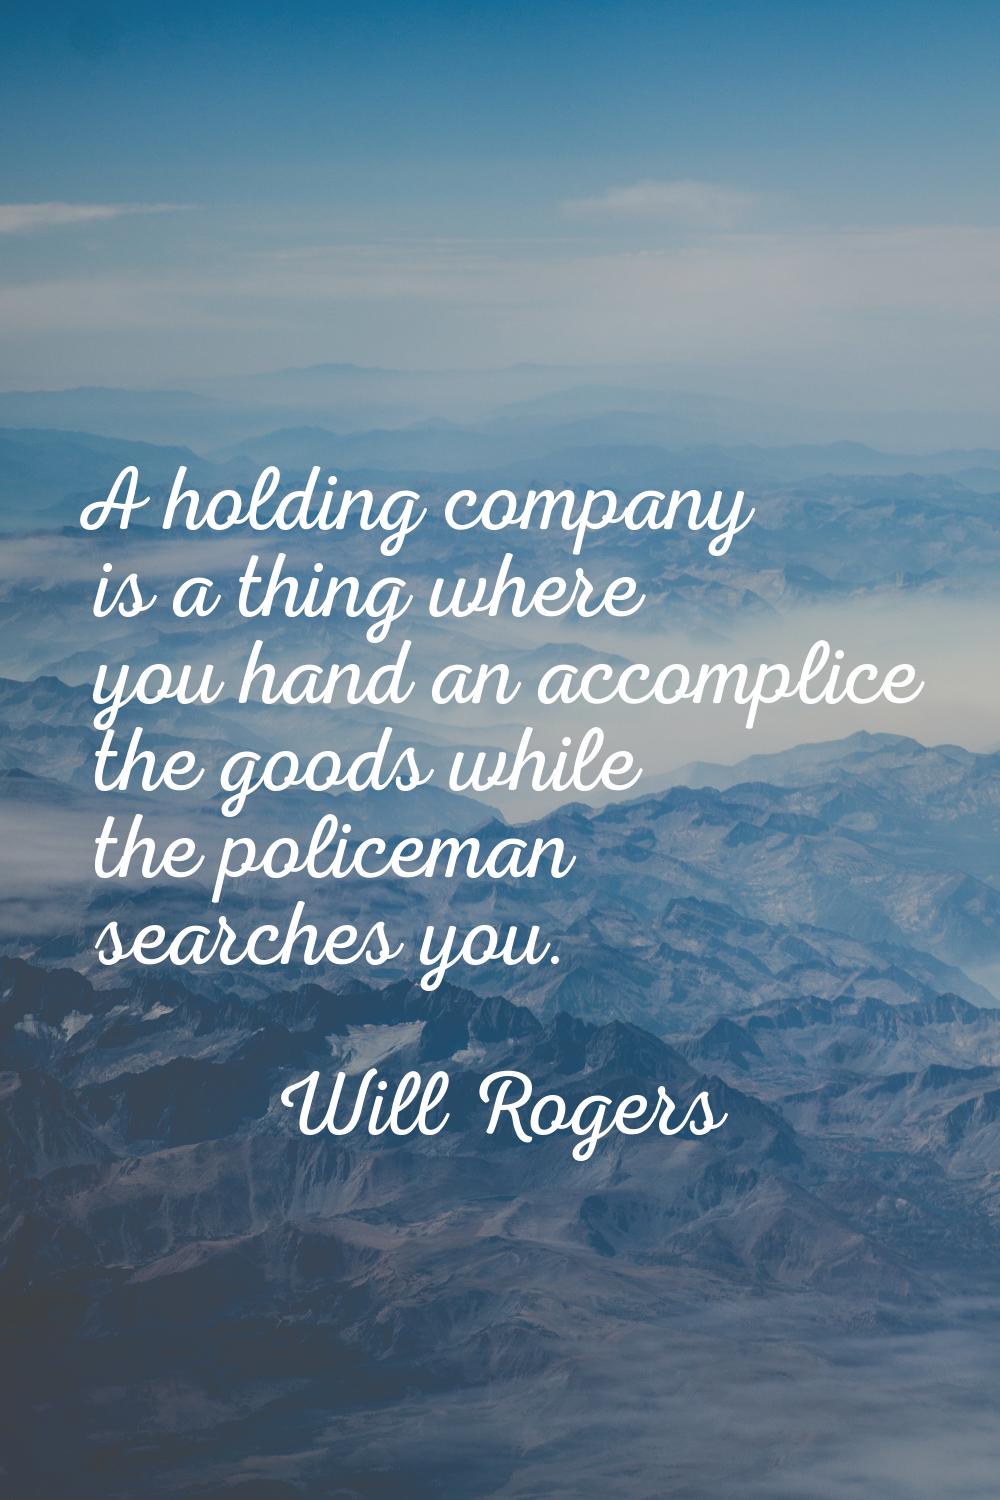 A holding company is a thing where you hand an accomplice the goods while the policeman searches yo